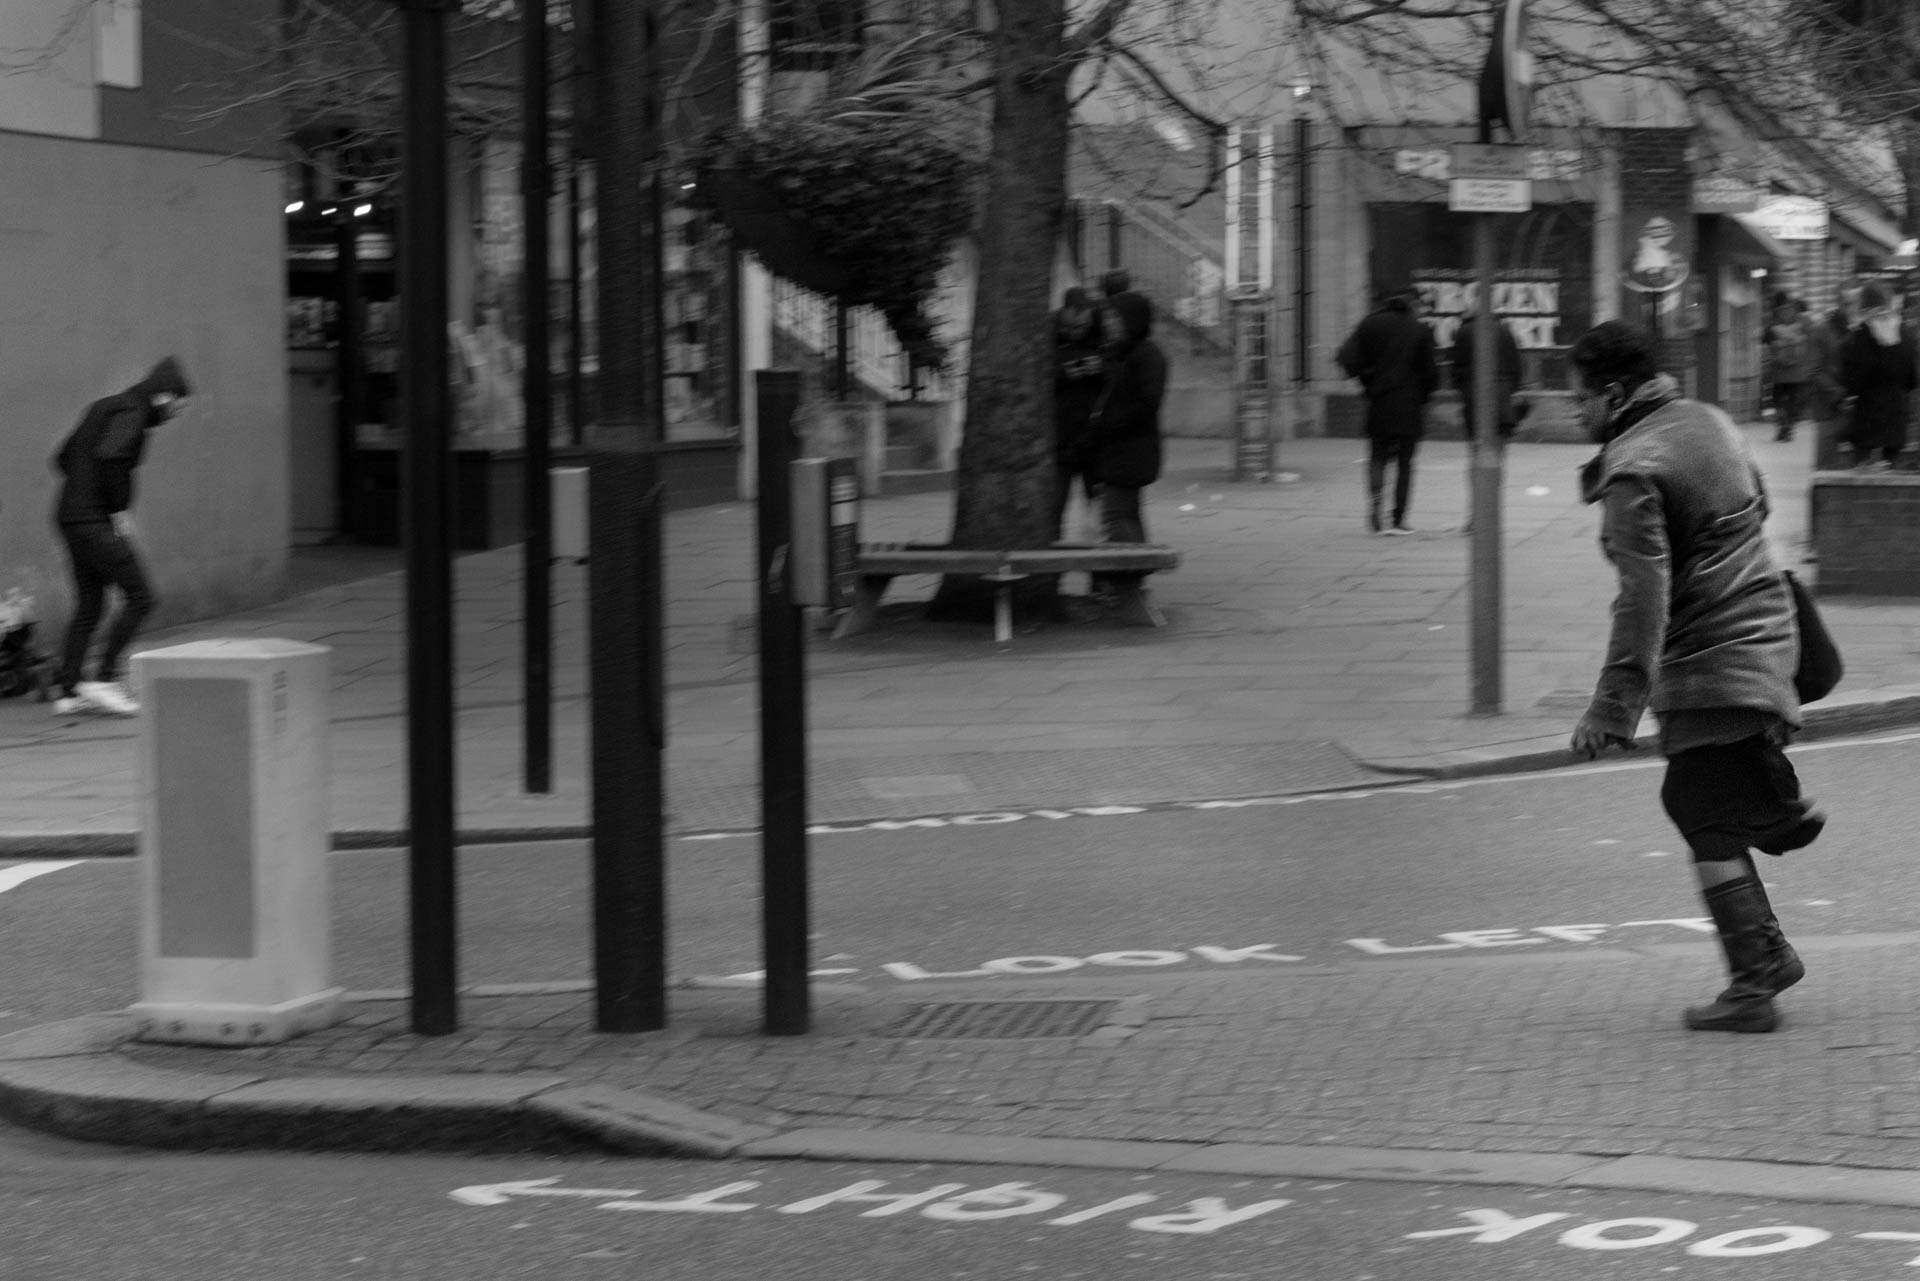 Strong wind in London, Streets, london photography, street photographers, tempest photography, tumblr photography, photography